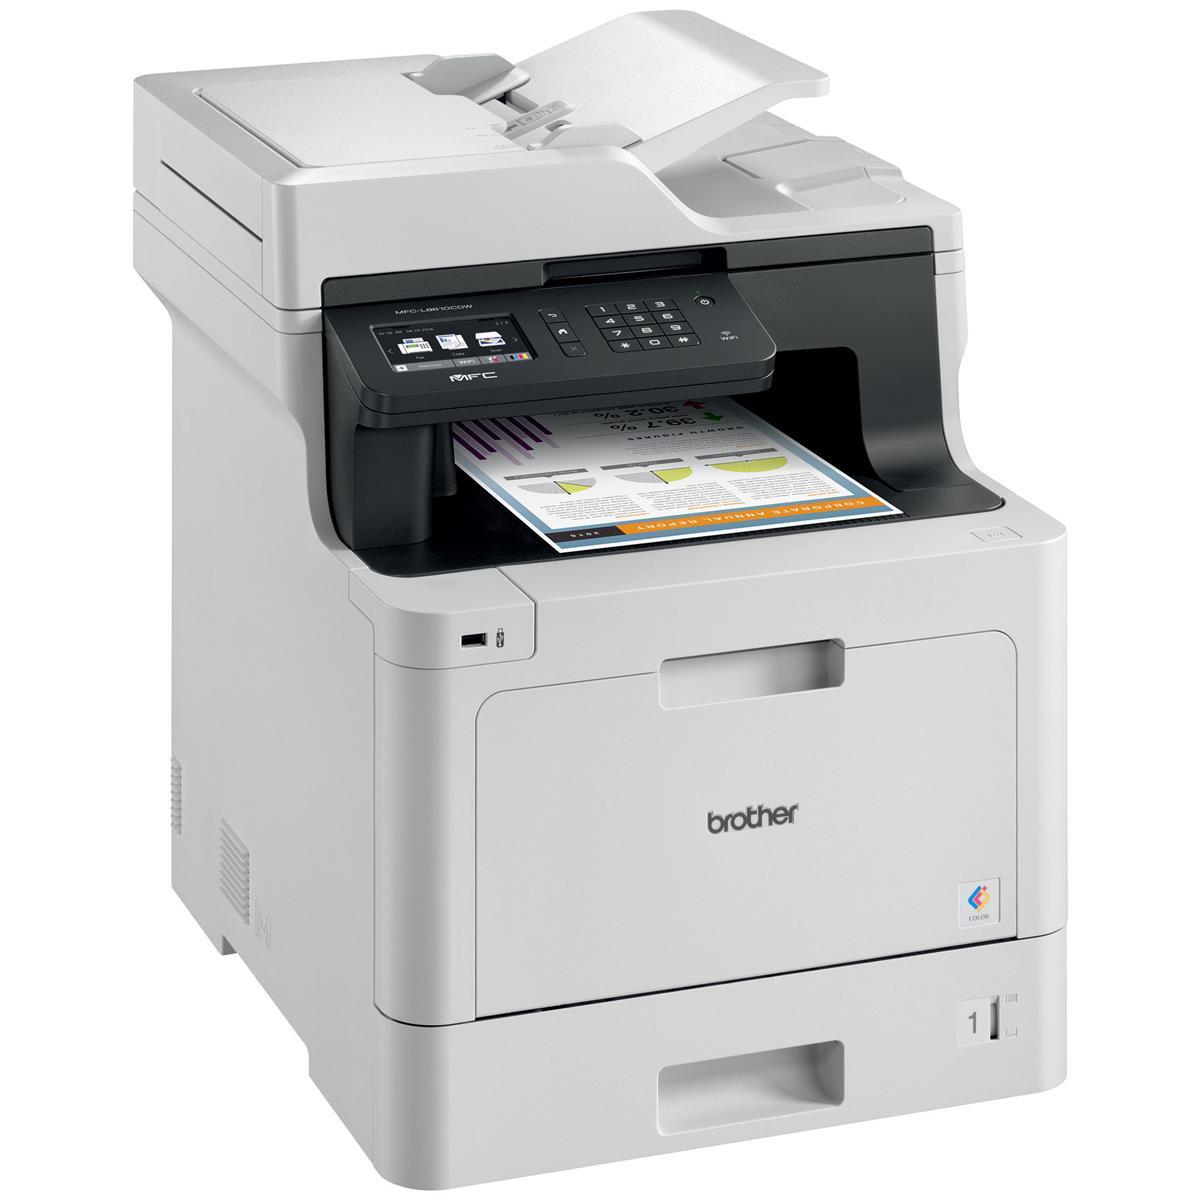 Image of Brother MFC-L8610CDW All-in-One Color Laser Printer